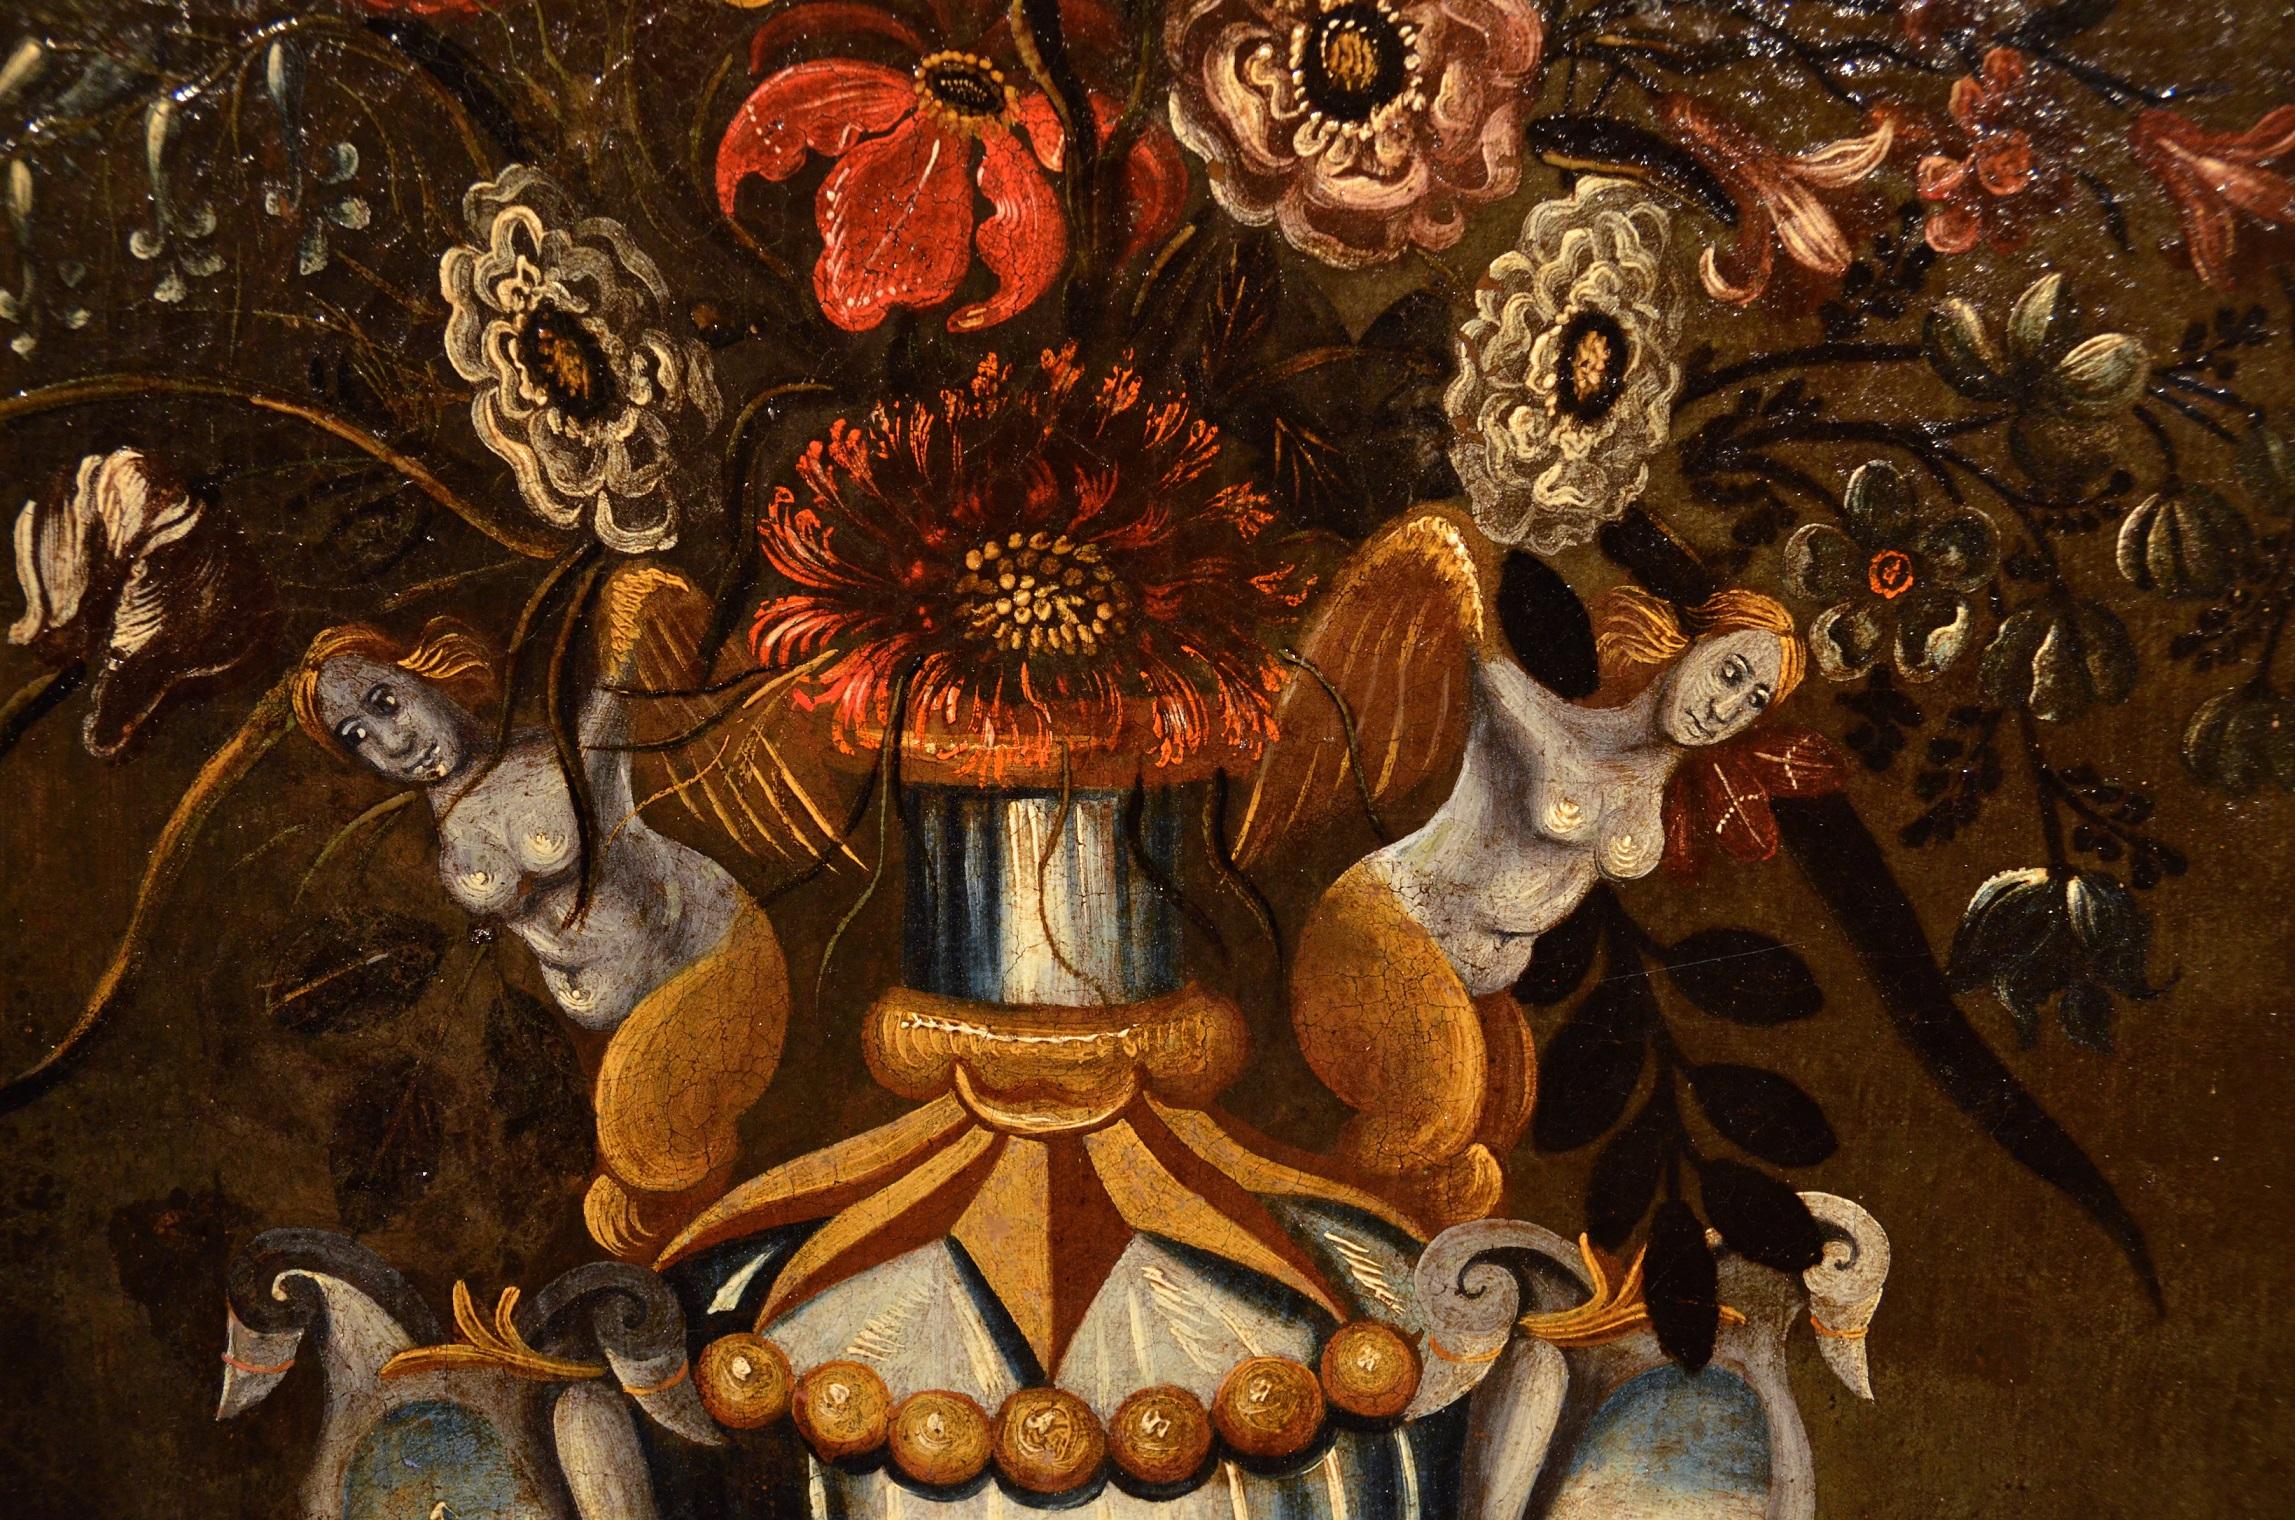 Flowers Paint Oil on canvas Old master 17th Century Italy Still-life Art   - Old Masters Painting by Master of the Grotesque Vase (active in Rome and Naples in the first quarter of the 17th century)